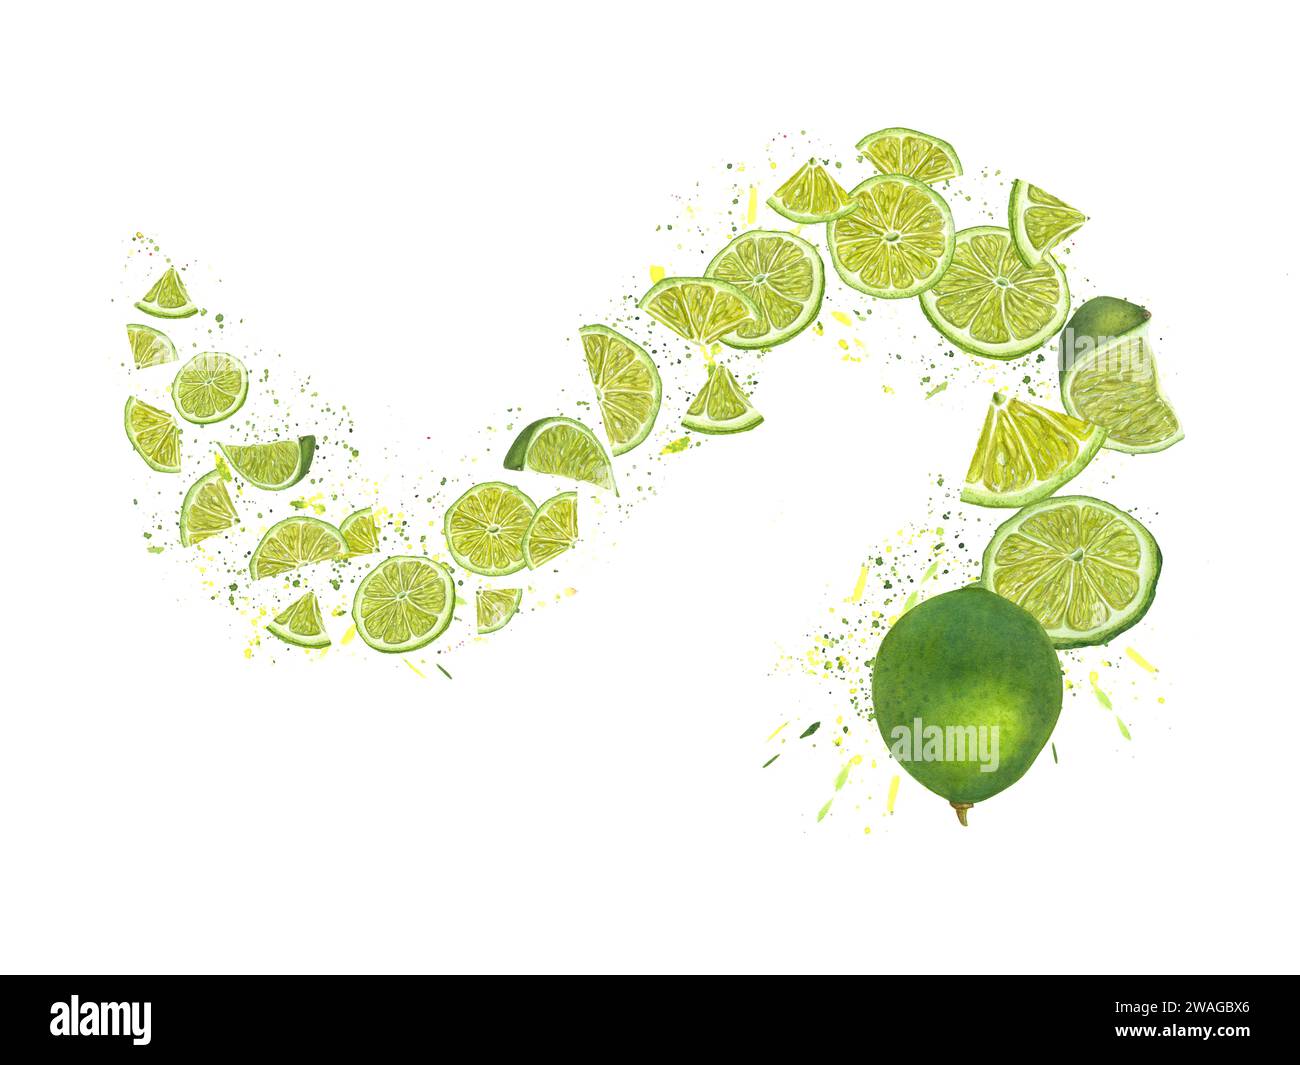 Spiral swirl of lime slices. Ripe citrus on a background of juice splashes. Colored confetti, flying abstract dots. Watercolor illustration Stock Photo